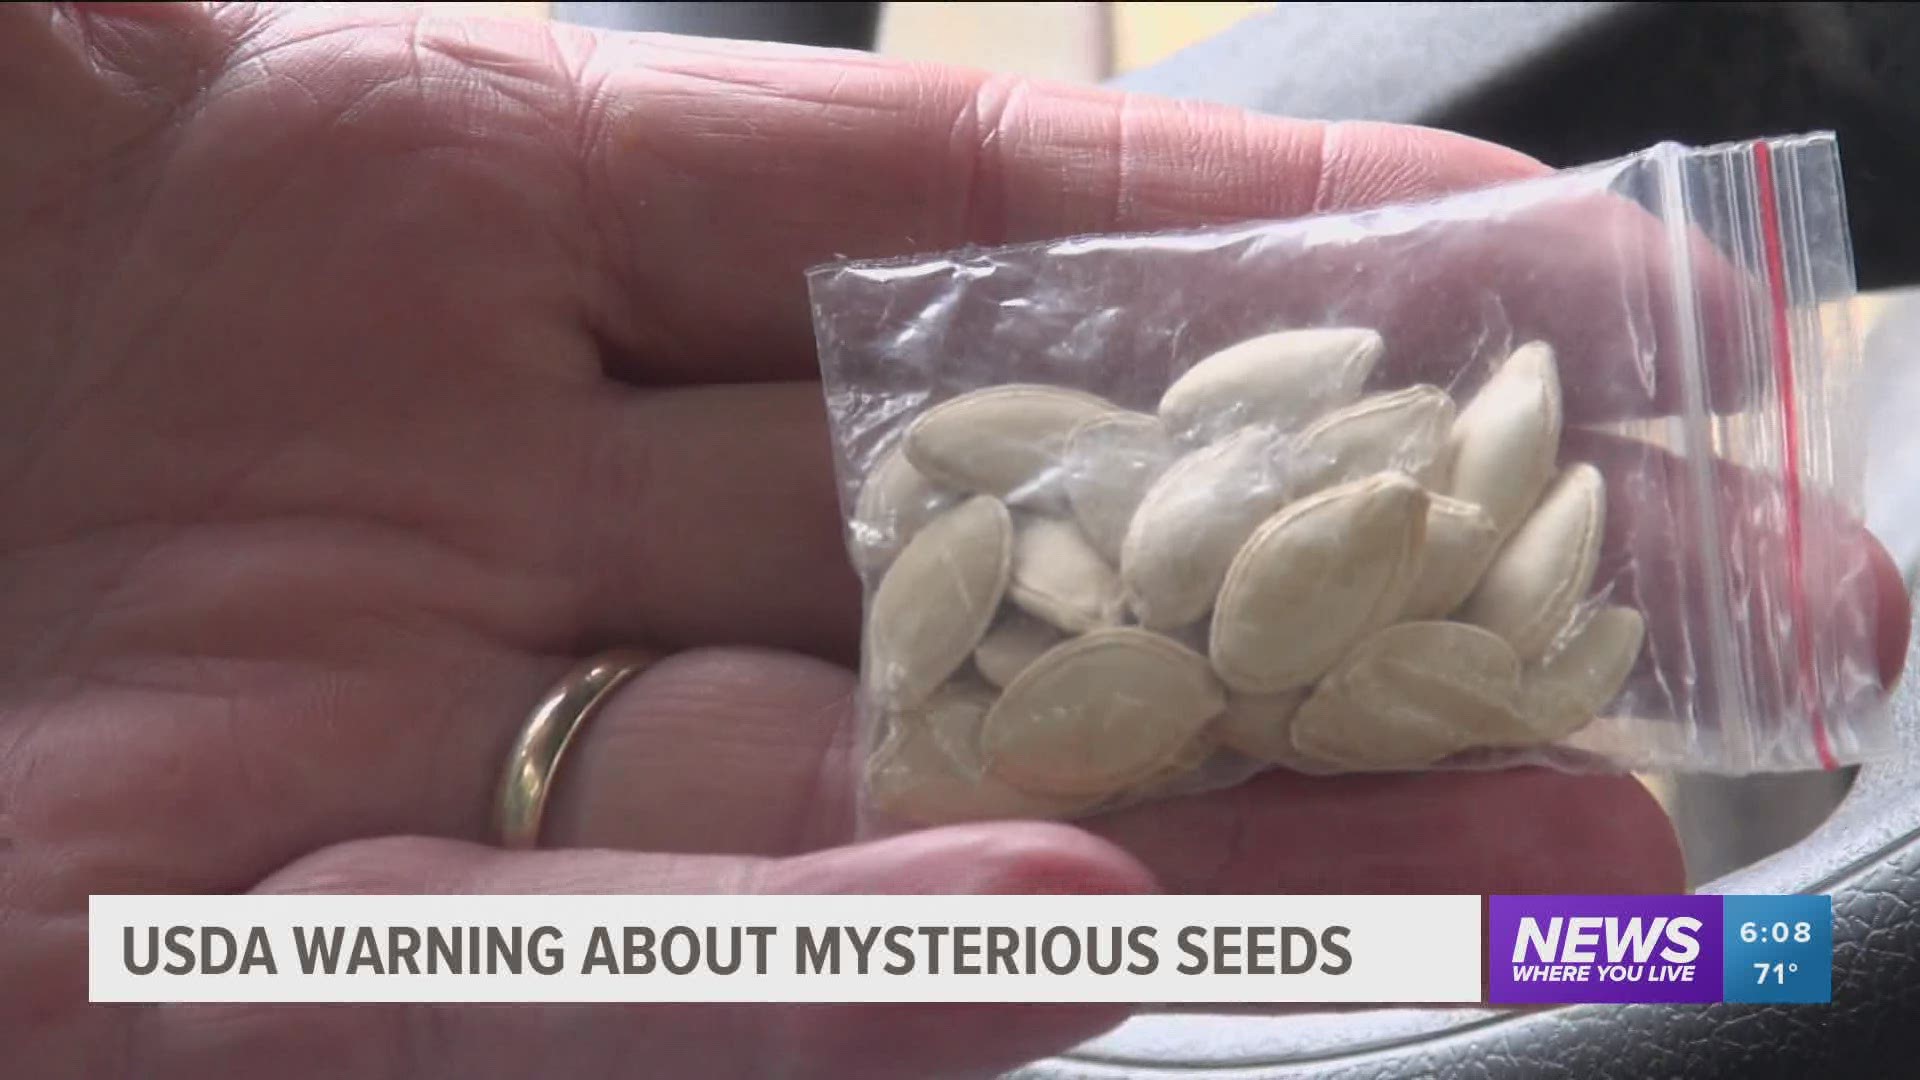 The U.S Dept. of Agriculture is warning people to watch out for unsolicited packages of seeds shipped from China. https://bit.ly/33eGcBp